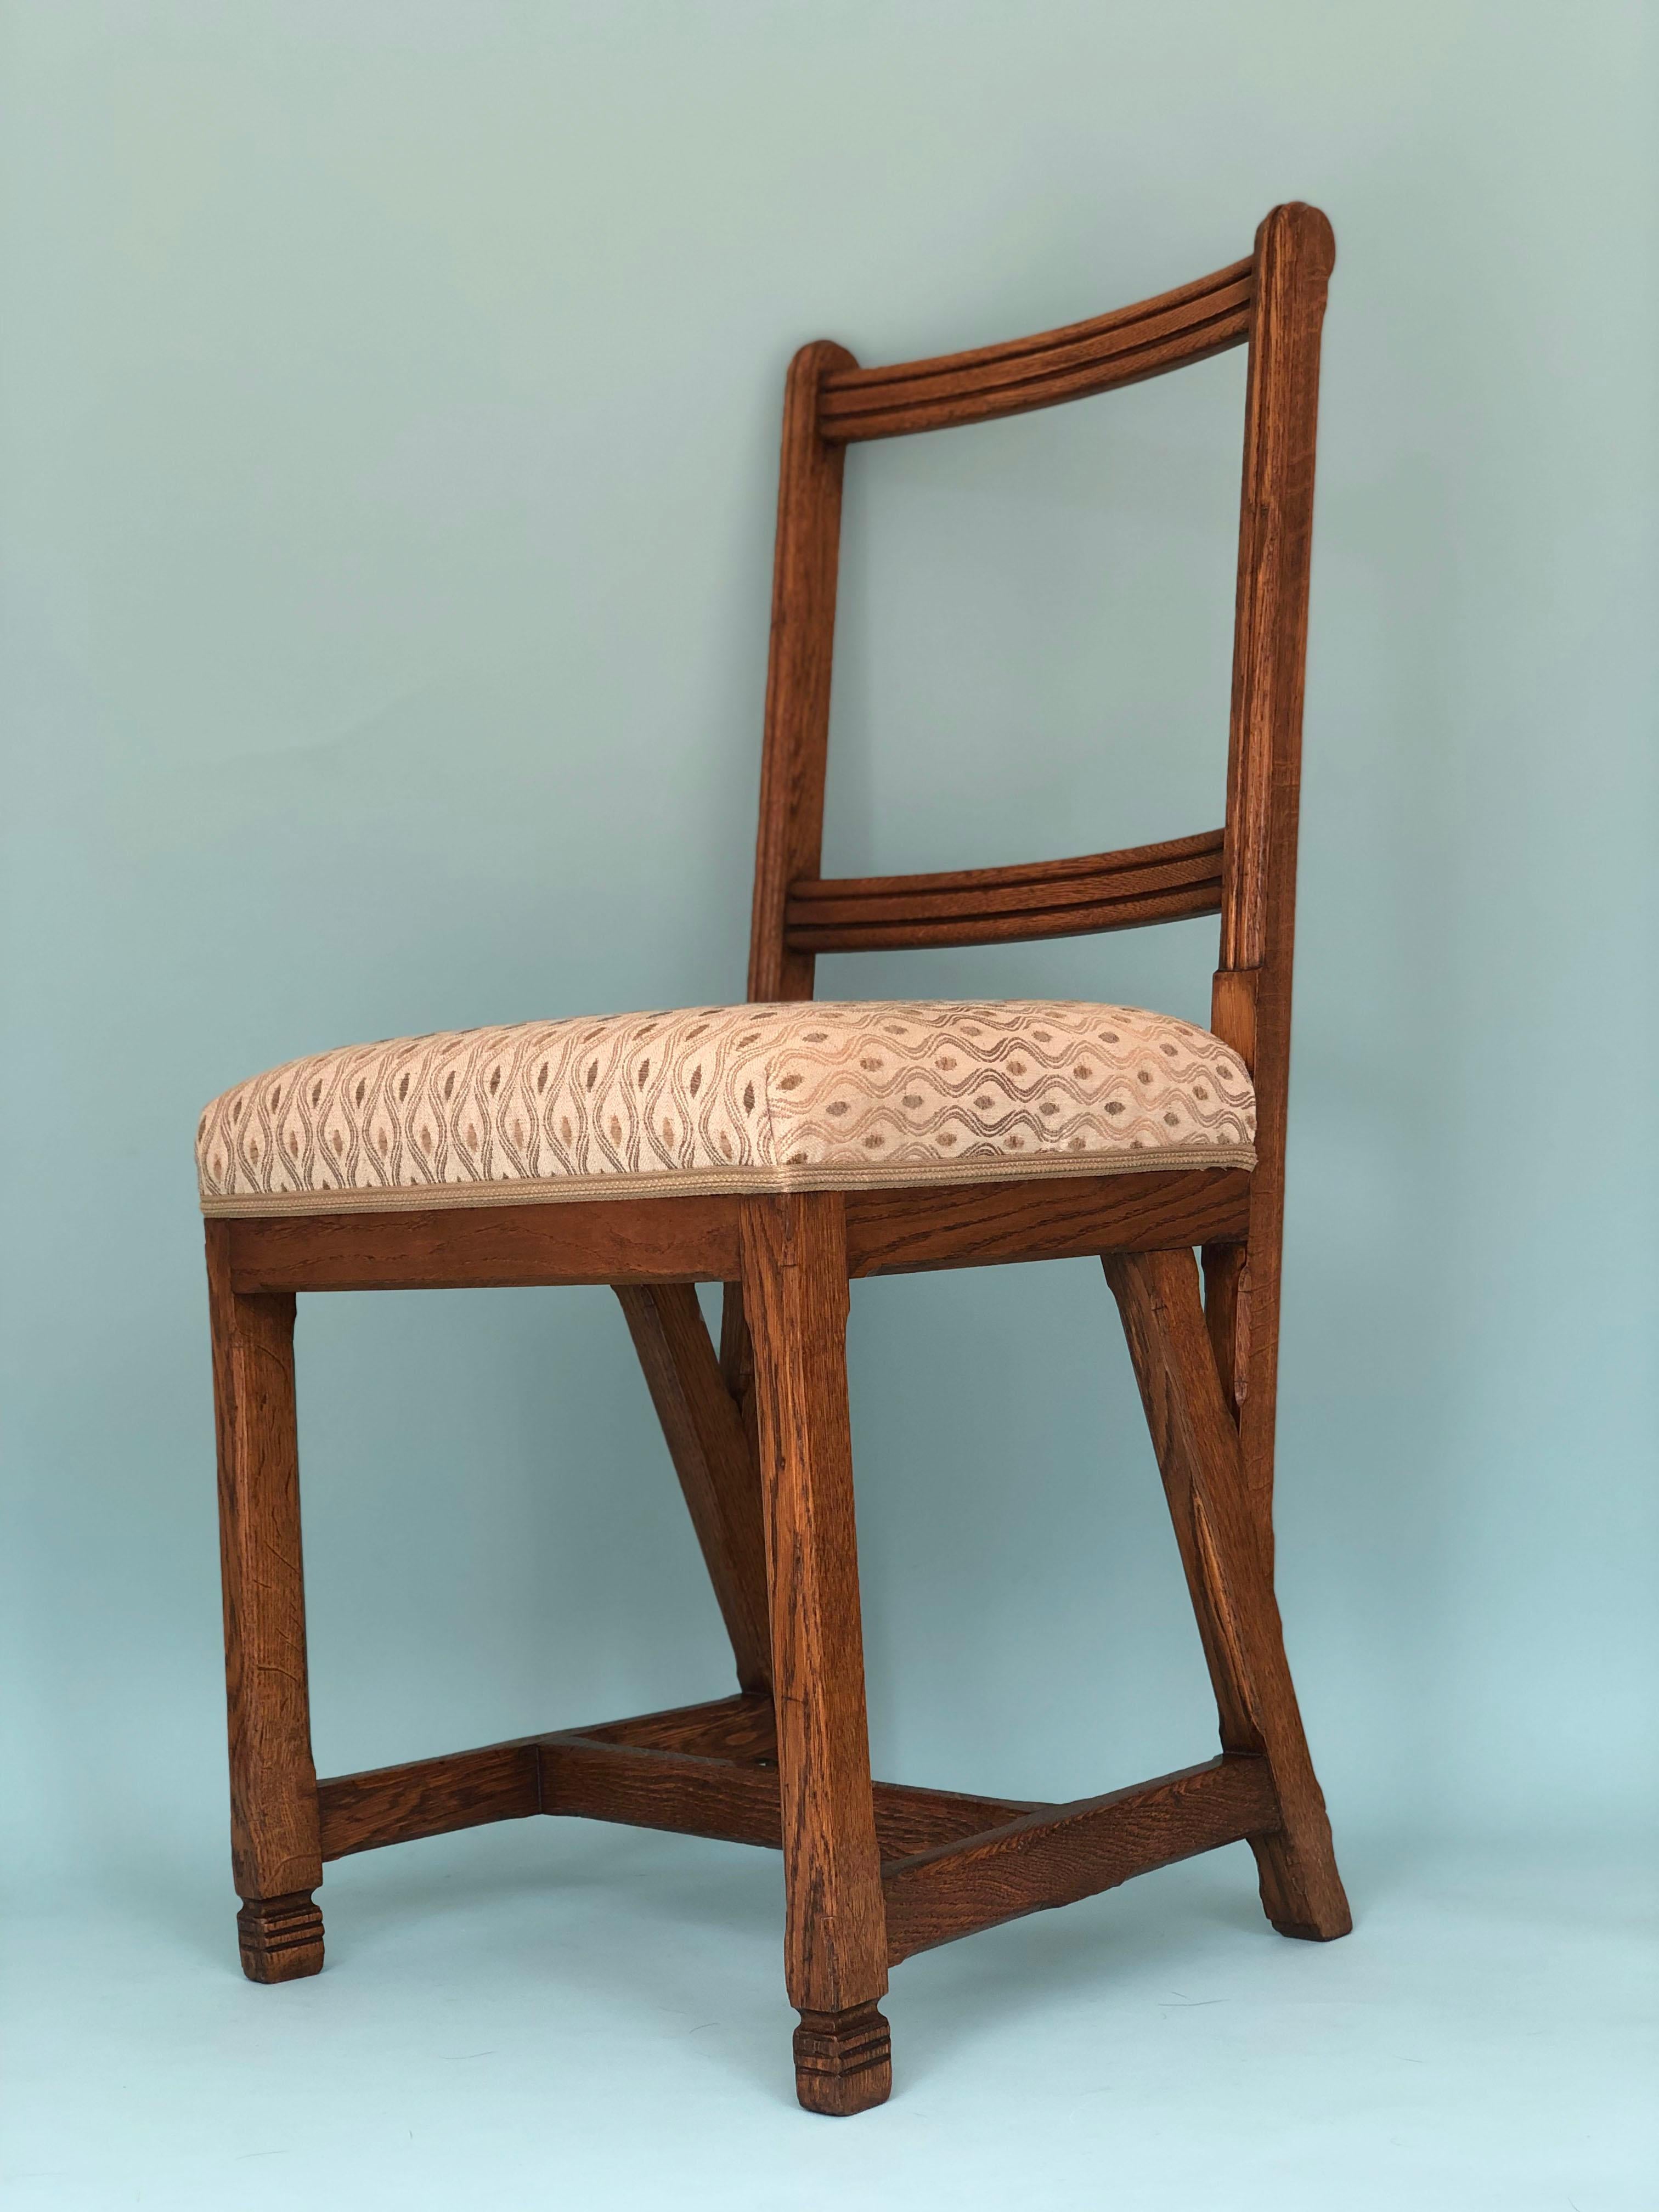 Dining chairs from H.P. Berlage designed for Leiden University around 1900. The chairs are beautifully carved. Not a single piece of wood is cut straight. The solid chairs are in very good condition.
A Dutch design piece from a well known architect.